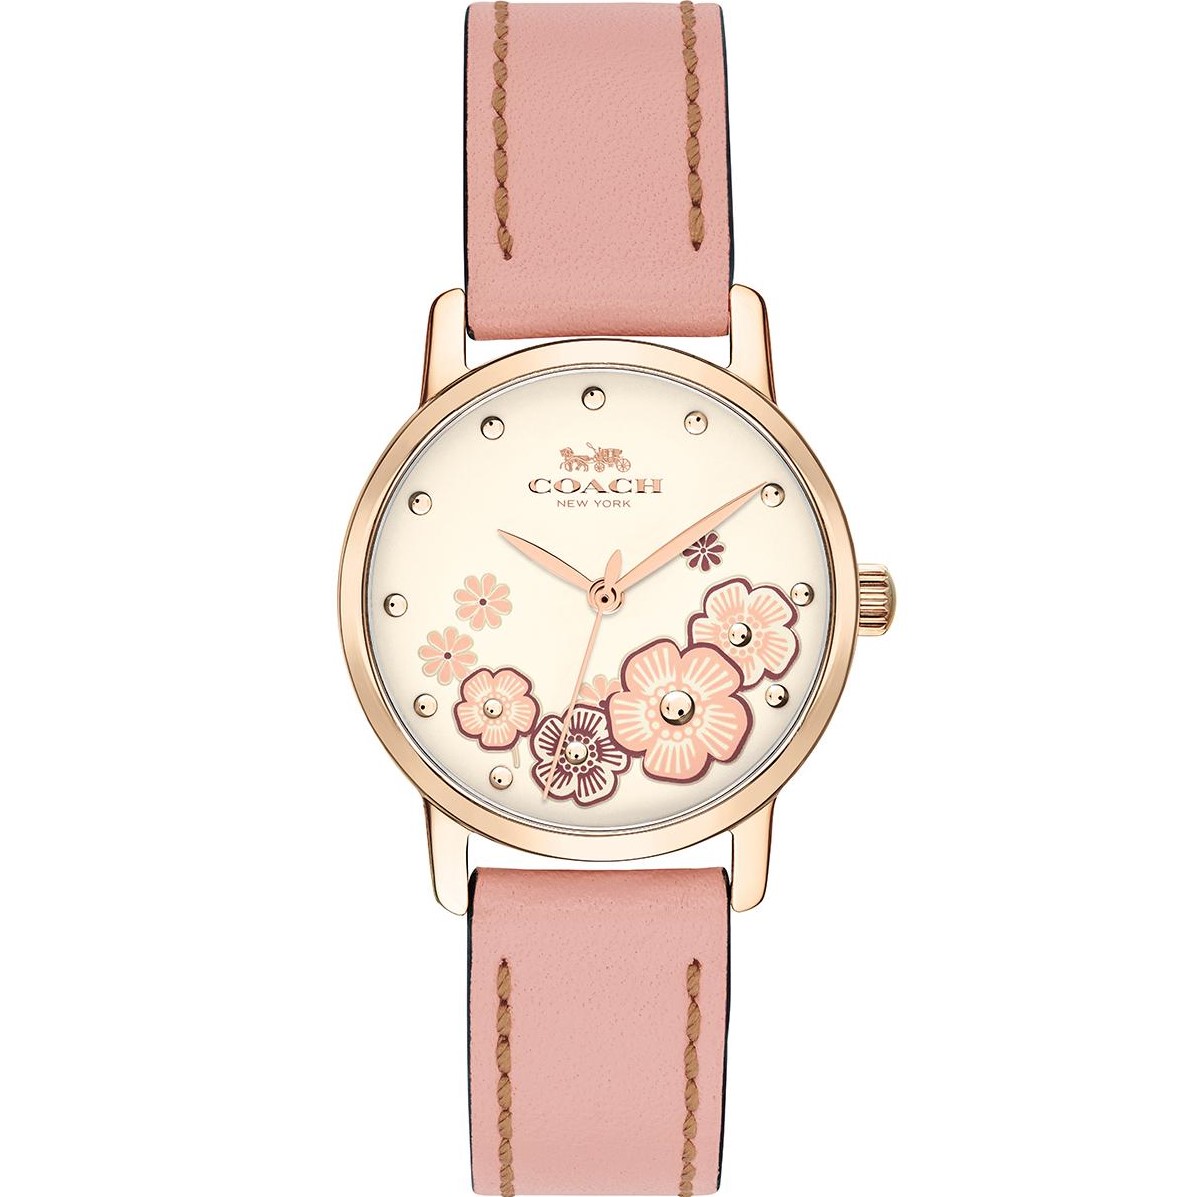 ĐỒNG HỒ NỮ DÂY DA HỒNG COACH FLORAL GRAND ANALOG QUART GOLD STAINLESS STEEL PINK LEATHER STRAP WOMEN WATCH 14503060 1